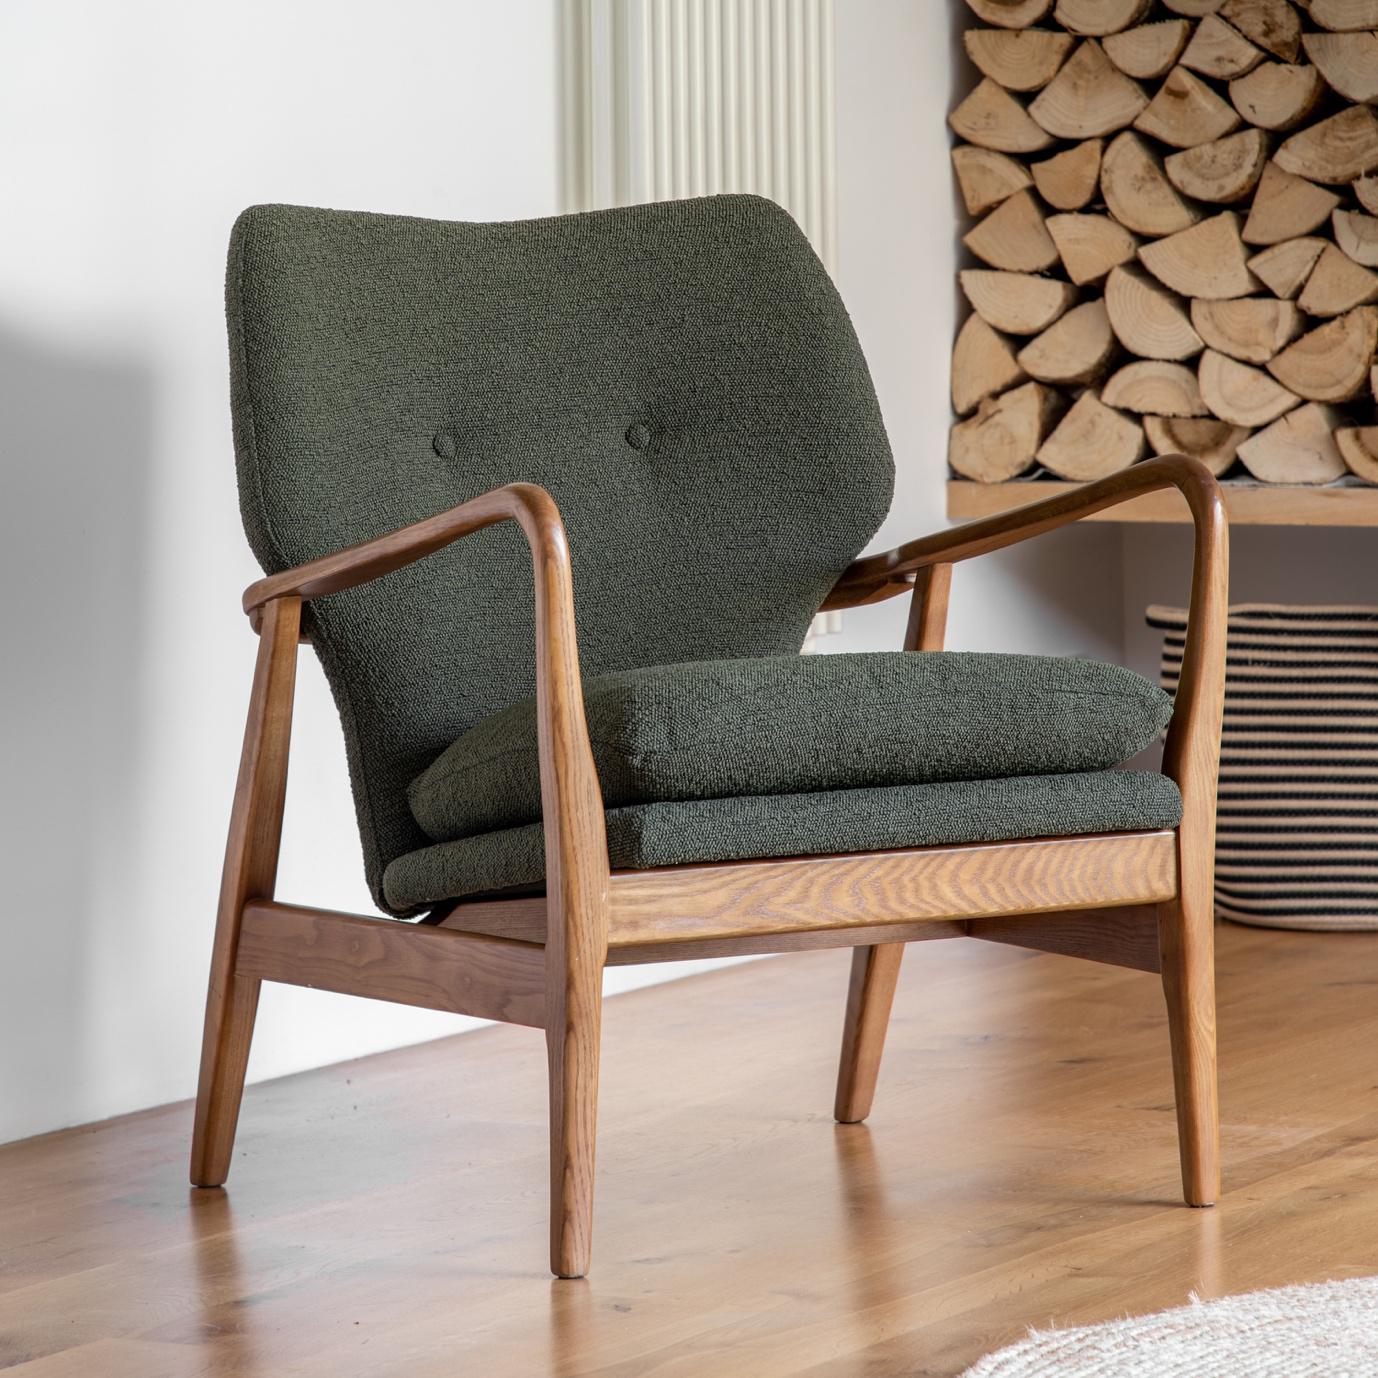 Exploring the Timeless Appeal of Wooden Armchairs